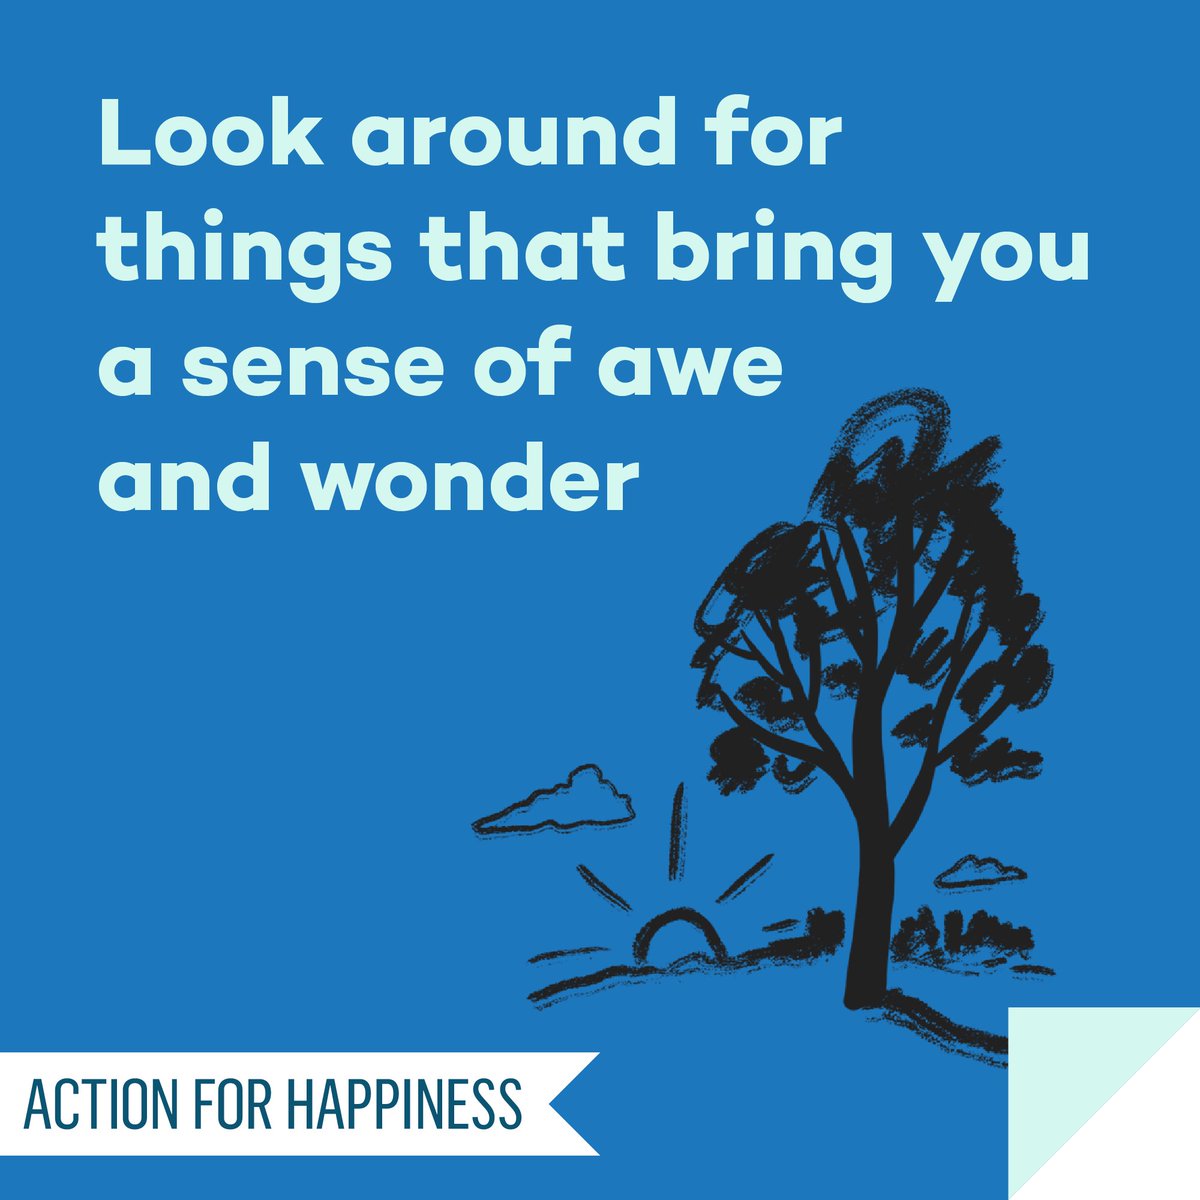 Meaningful May - Day 11: Look around for things that bring you a sense of awe and wonder actionforhappiness.org/meaningful-may #MeaningfulMay